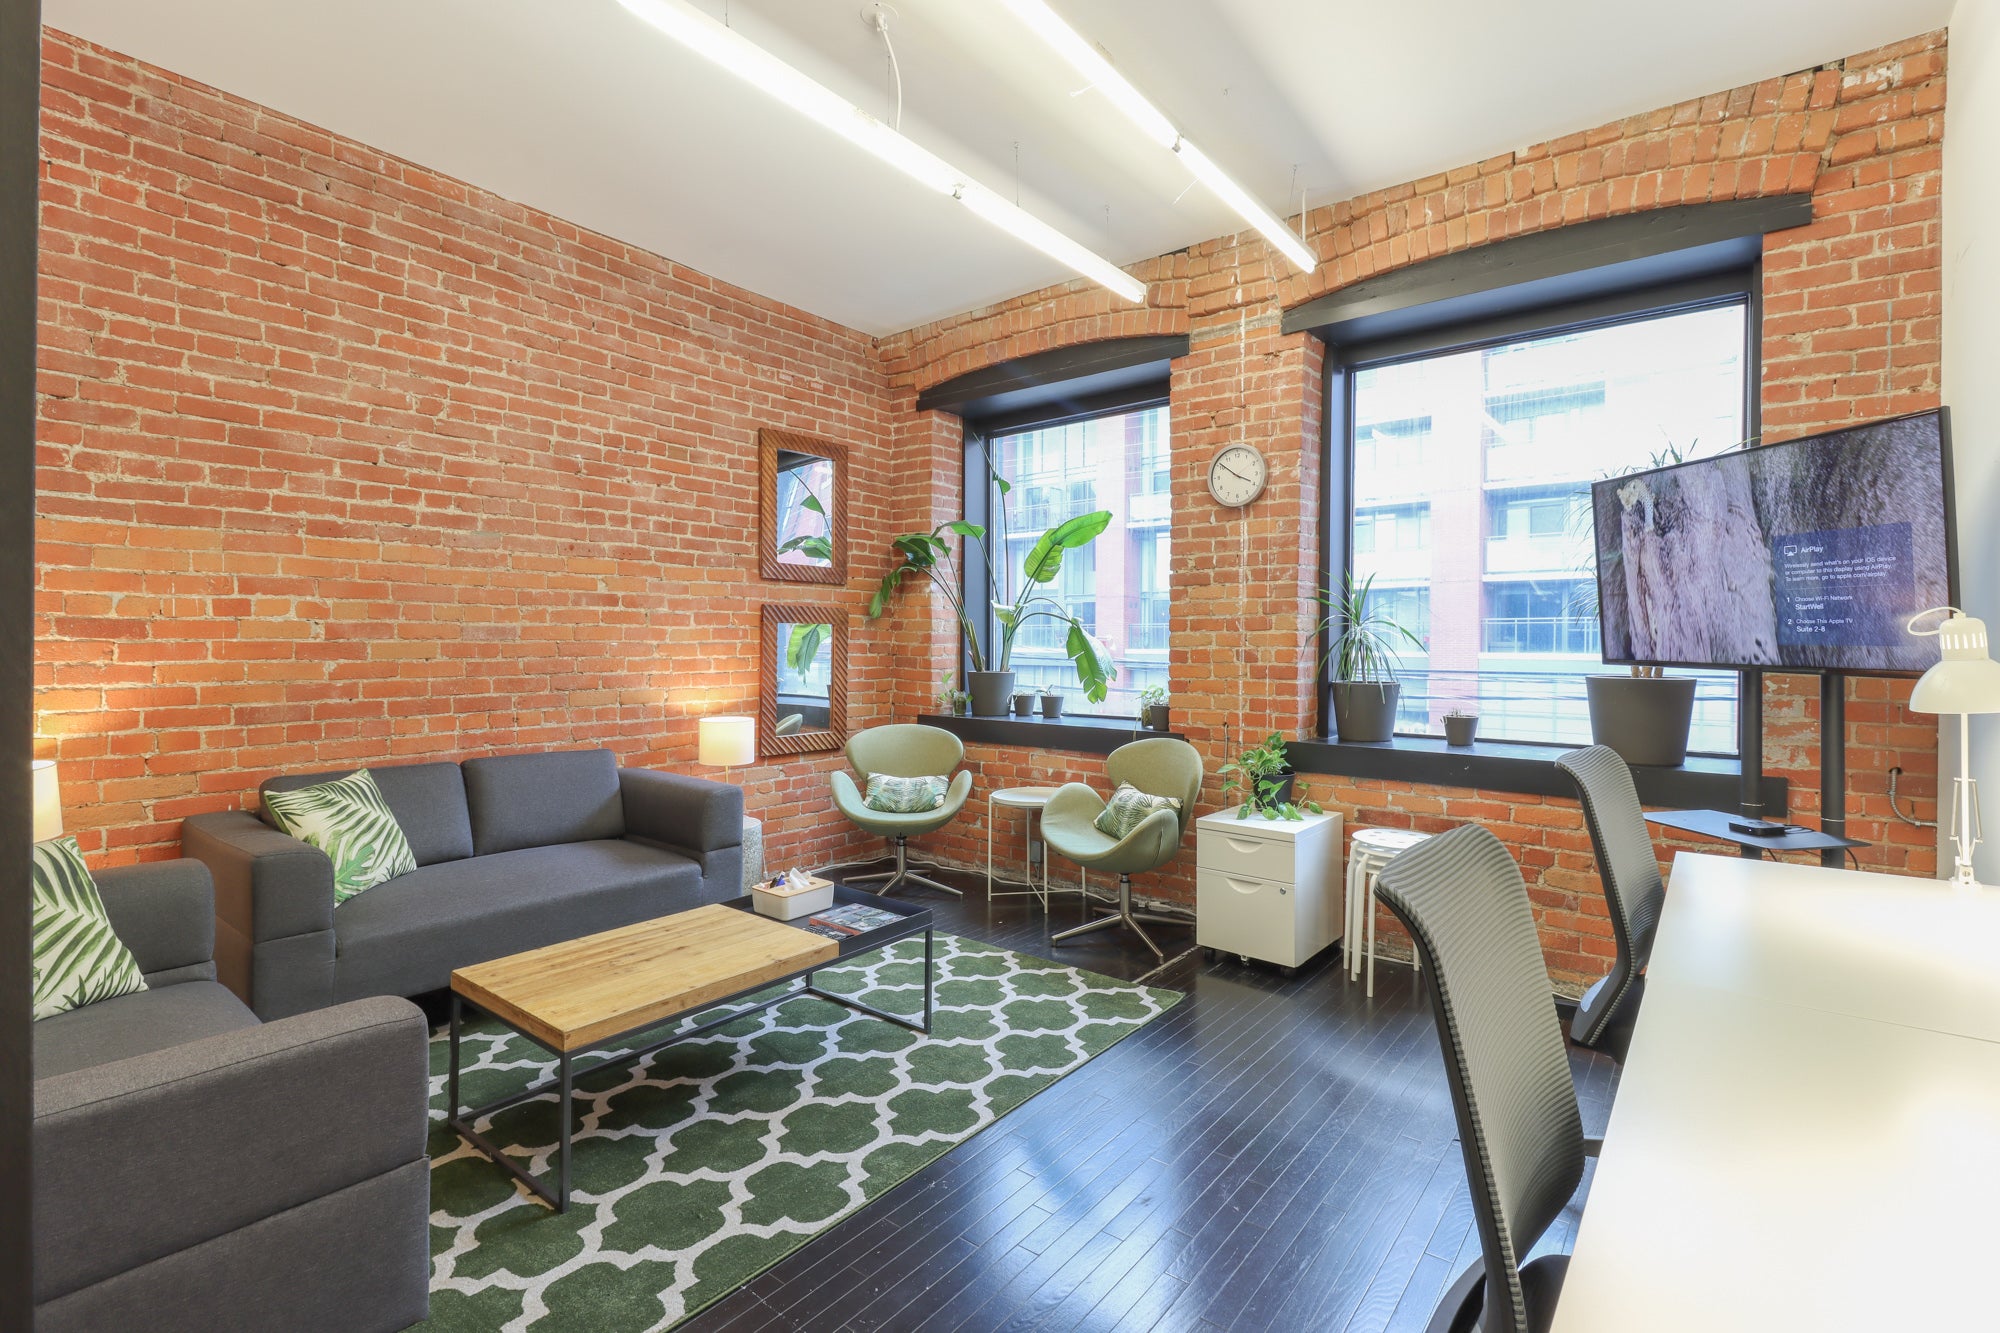 StartWell coworking offers rentable lounge space - perfect for informal or intimate meetings - like this one, the Green Room